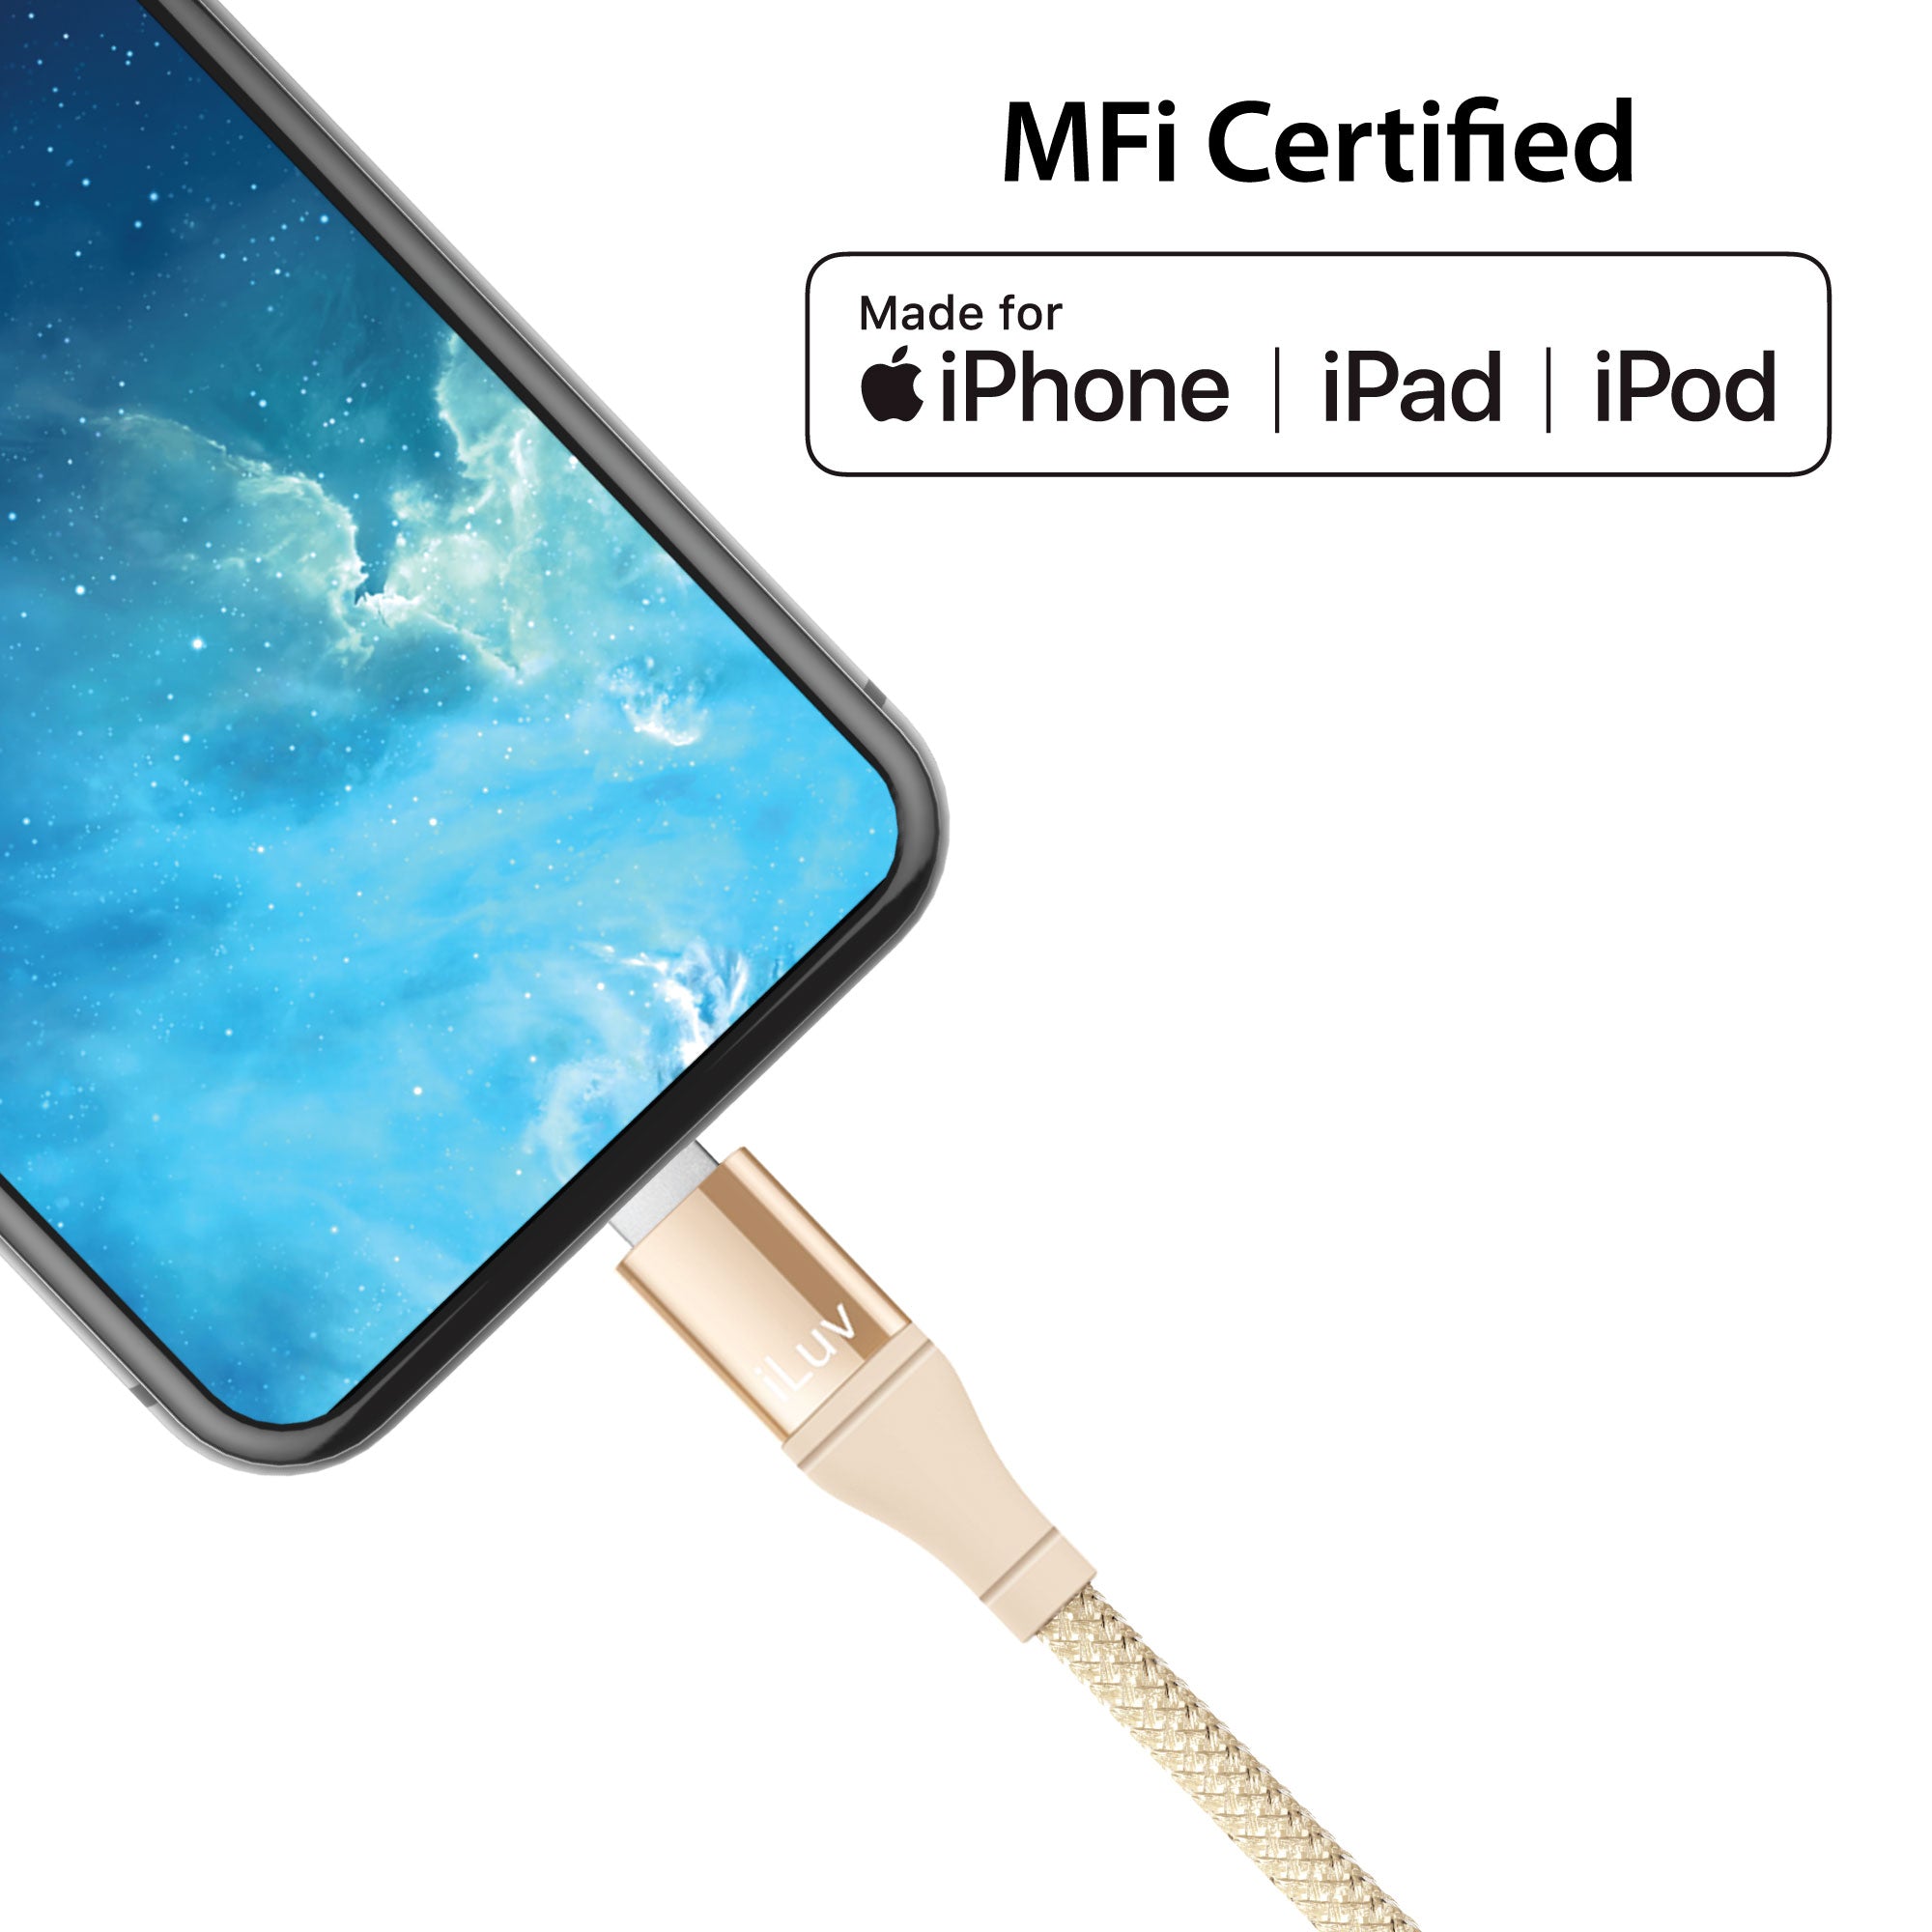 Fast Charging USB-C to Lightning Cable 3ft/6ft/10ft – iLuv Creative  Technology